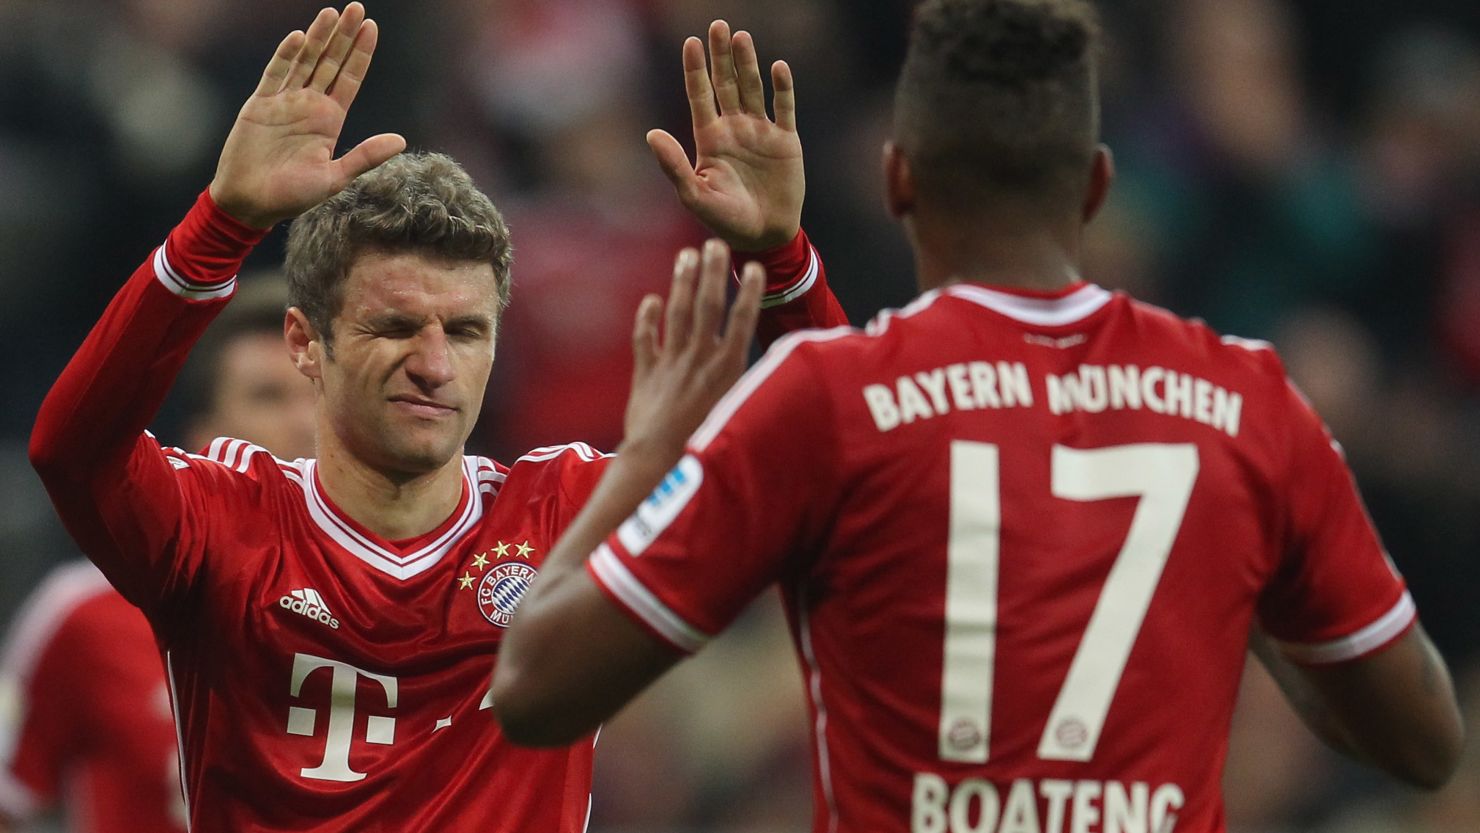 Thomas Mueller (L) celebrates scoring Bayern Munich's third goal with Jerome Boateng who also scored in the 3-0 win.